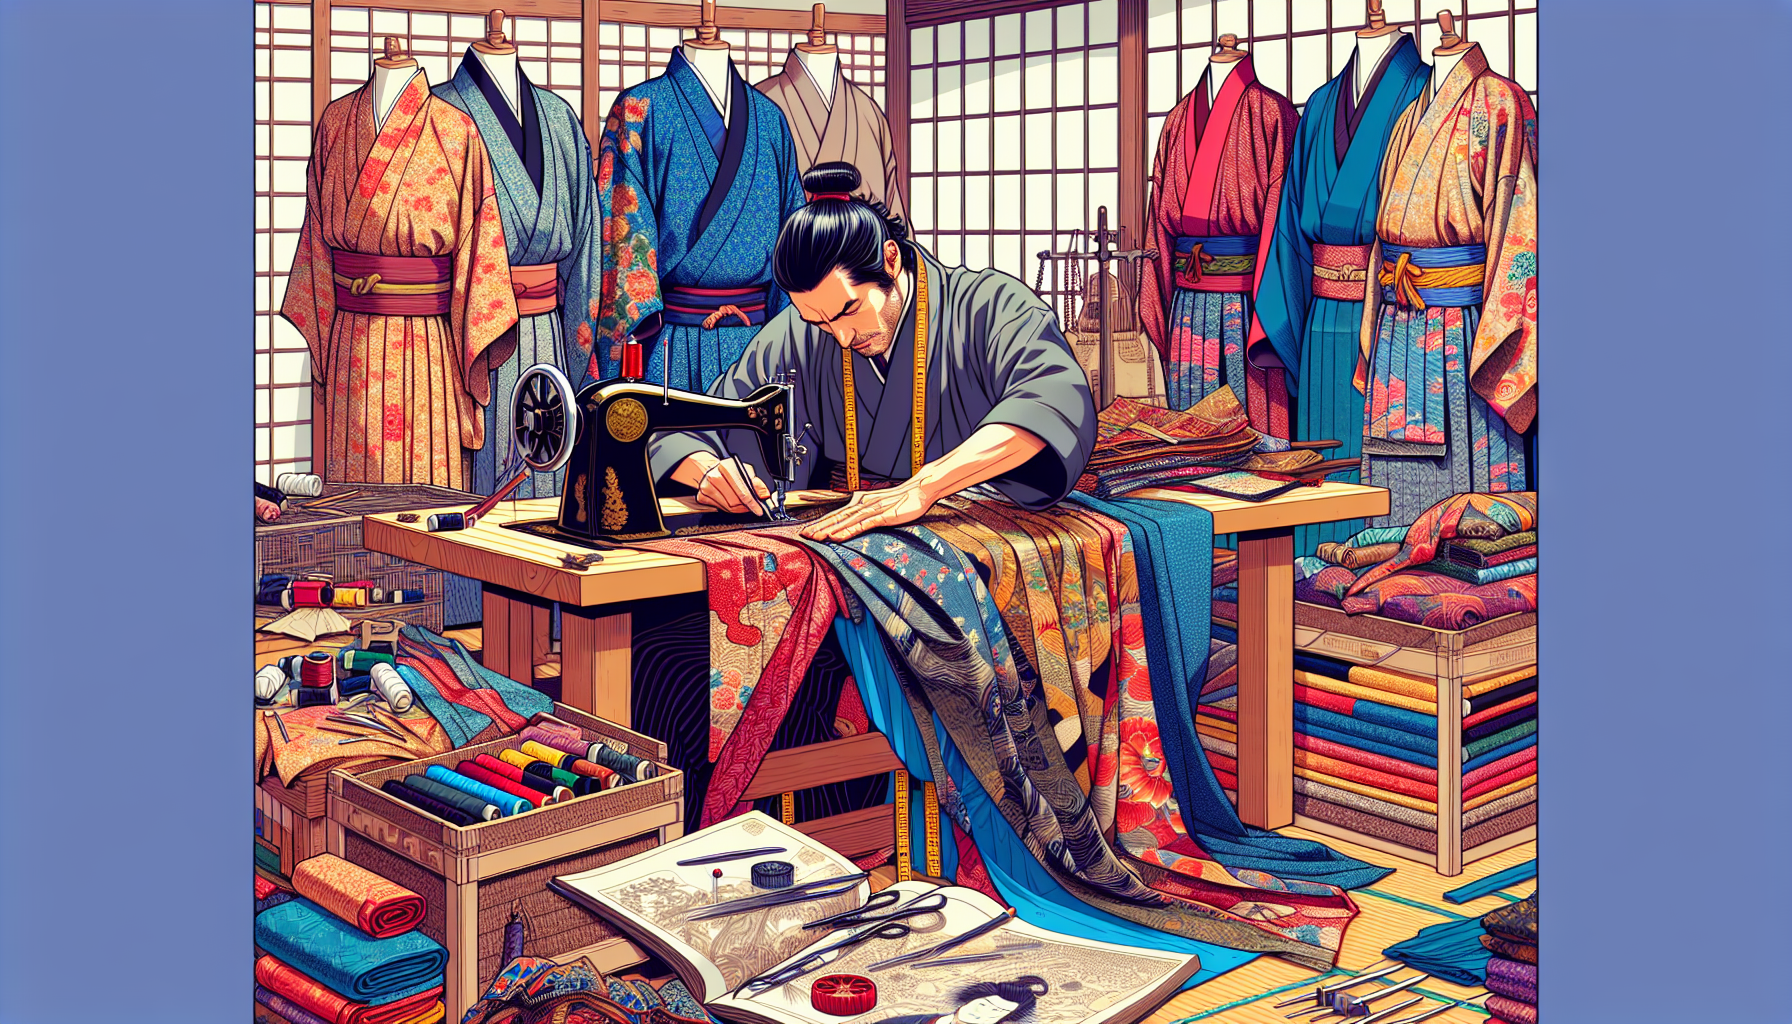 a skilled tailor, Carlos Rosario, surrounded by an array of traditional Japanese fabrics and sewing tools, meticulously crafting elaborate historical costumes for the TV show 'Shōgun' in a detailed, v